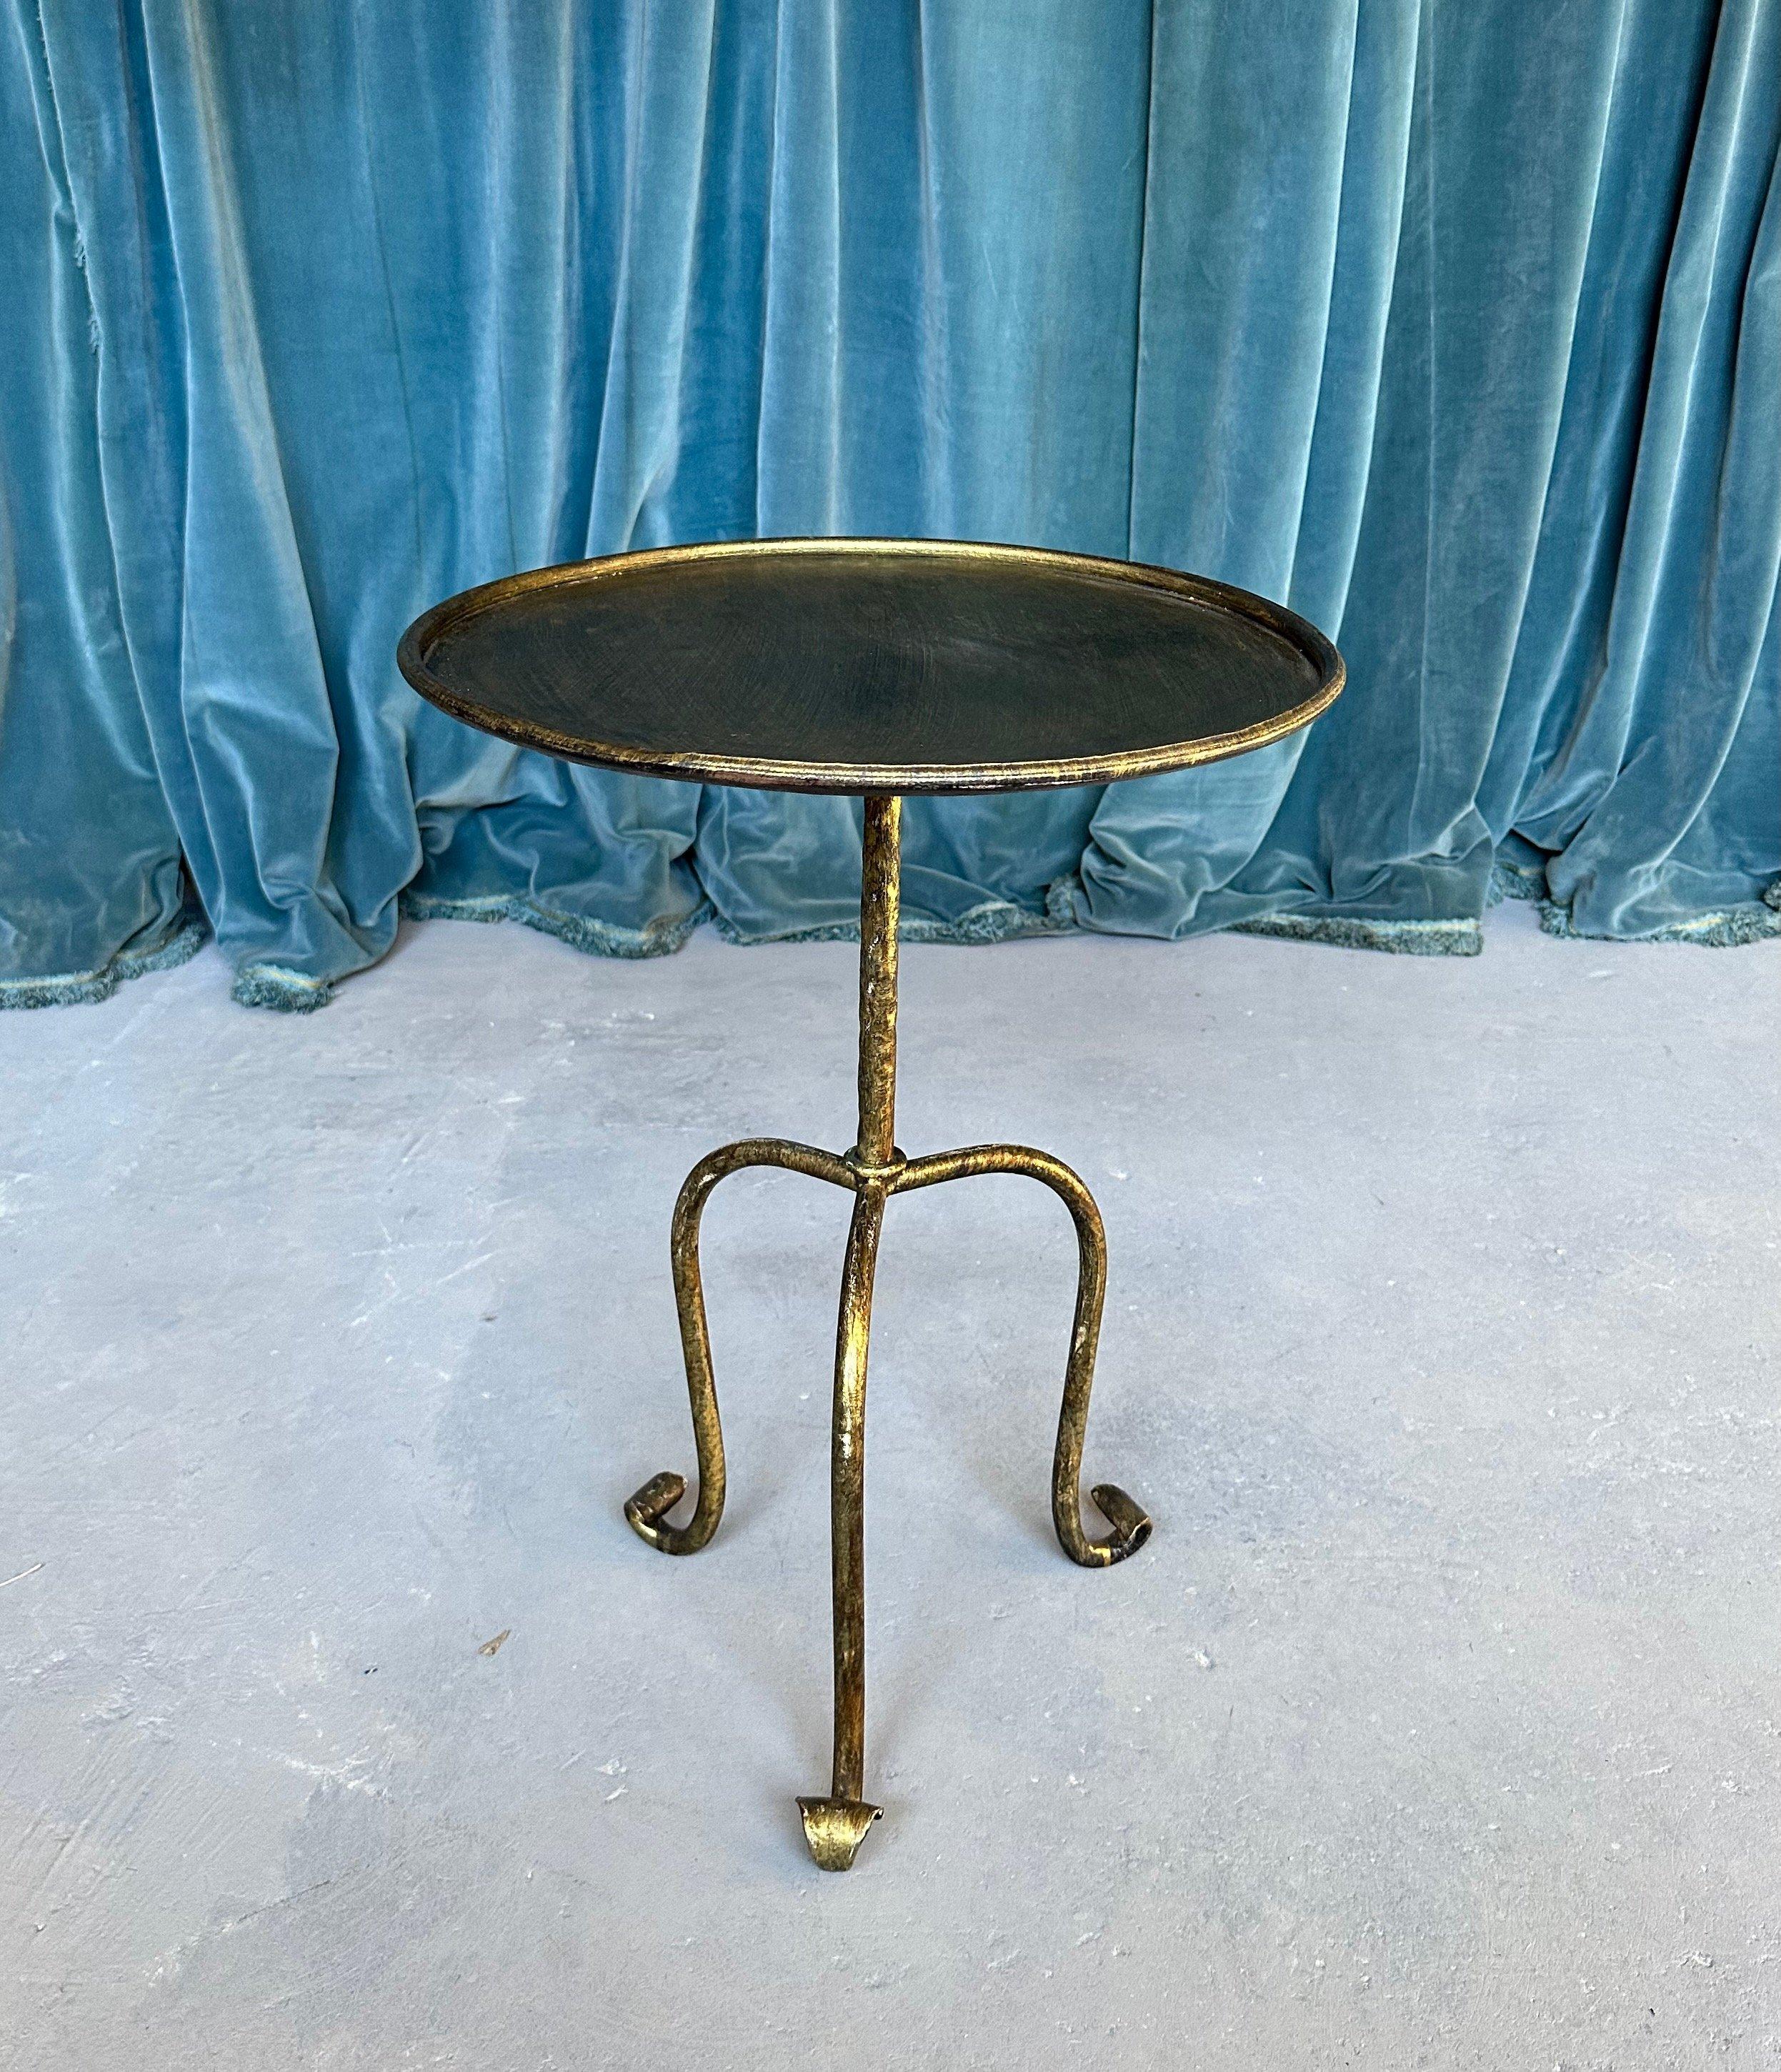 This unique small scaled side table was recently made by European artisans. It features a hand applied gold finish with dark undertones and is mounted on a fanciful elevated tripod base ending in upwardly scrolled feet. The size of this table is